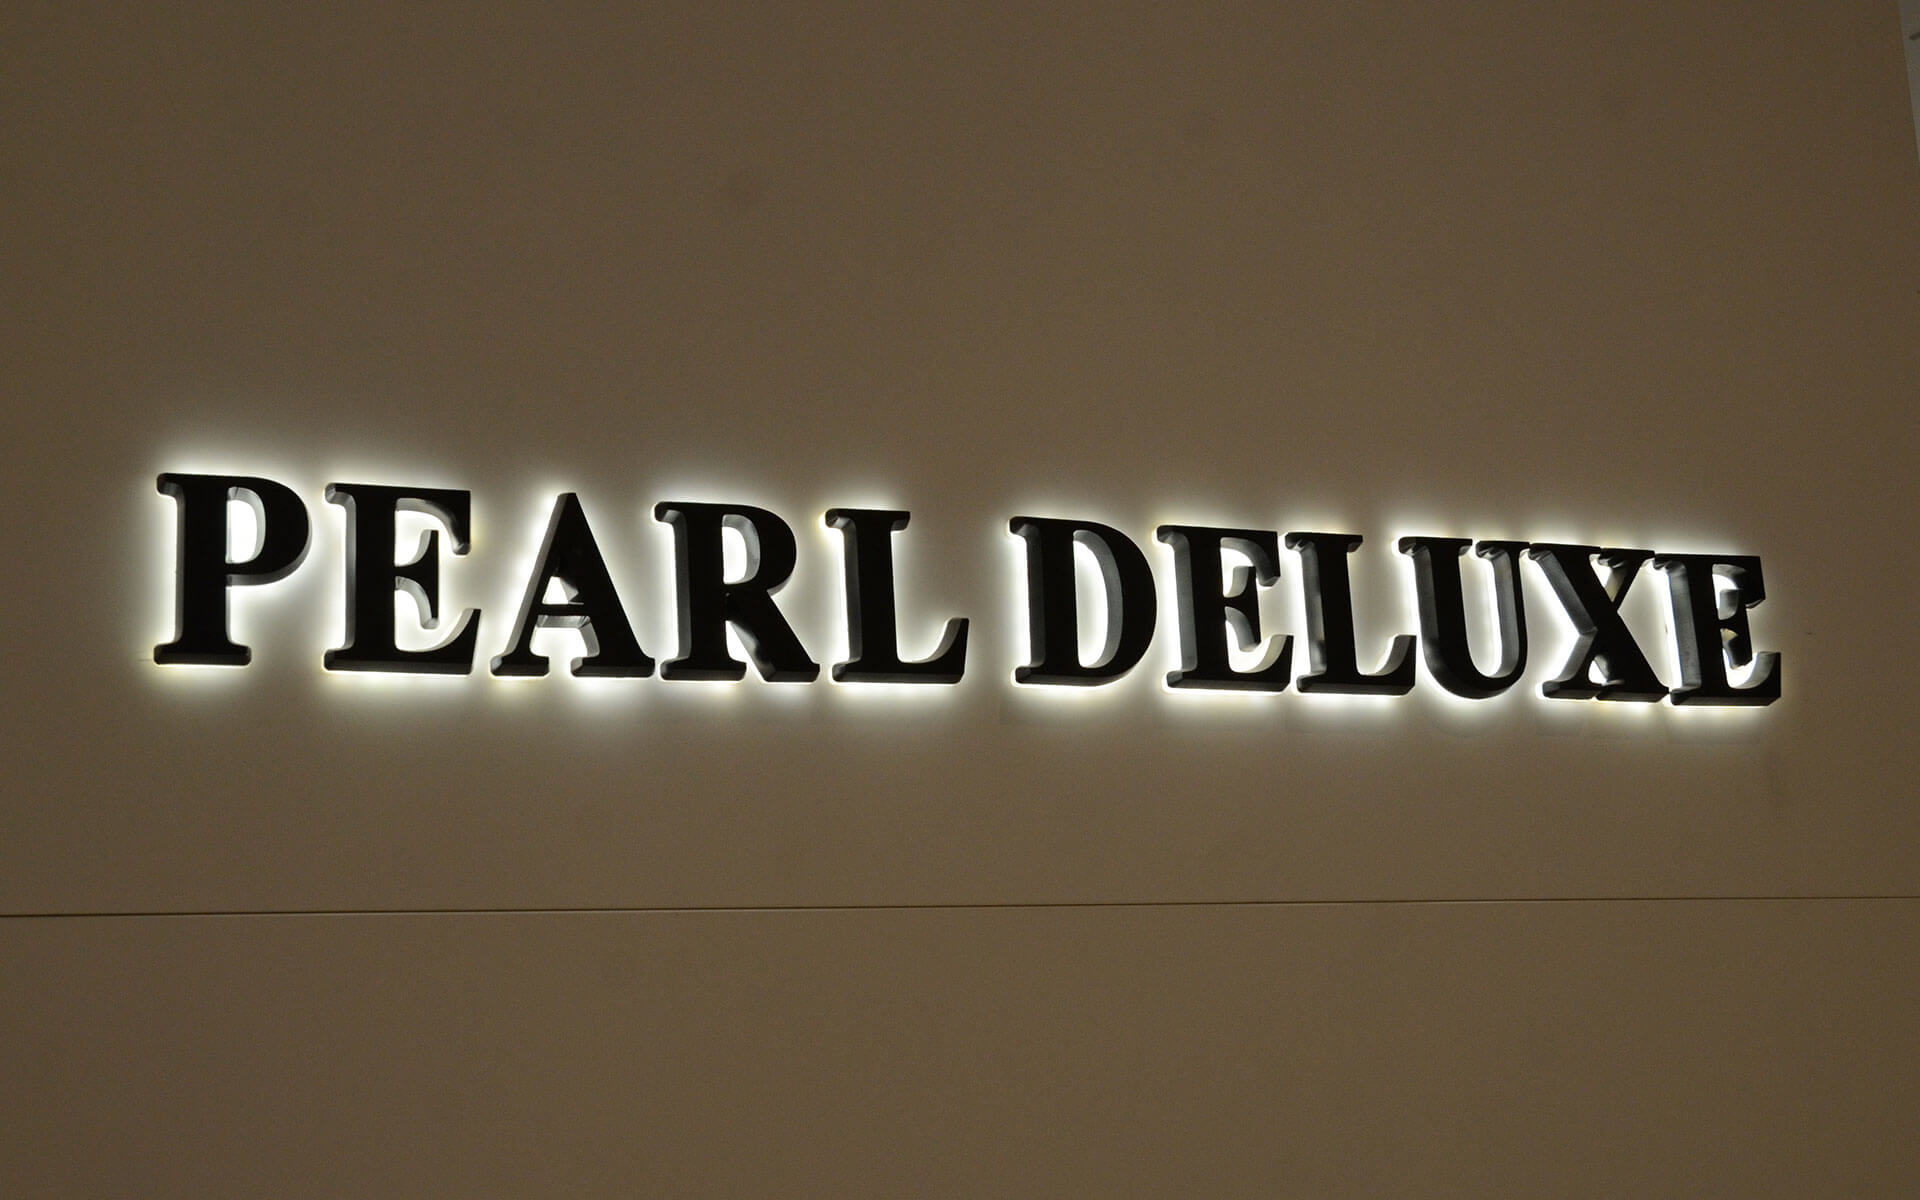 Back-lit Acrylic Channel Letters for Pearl Deluxe